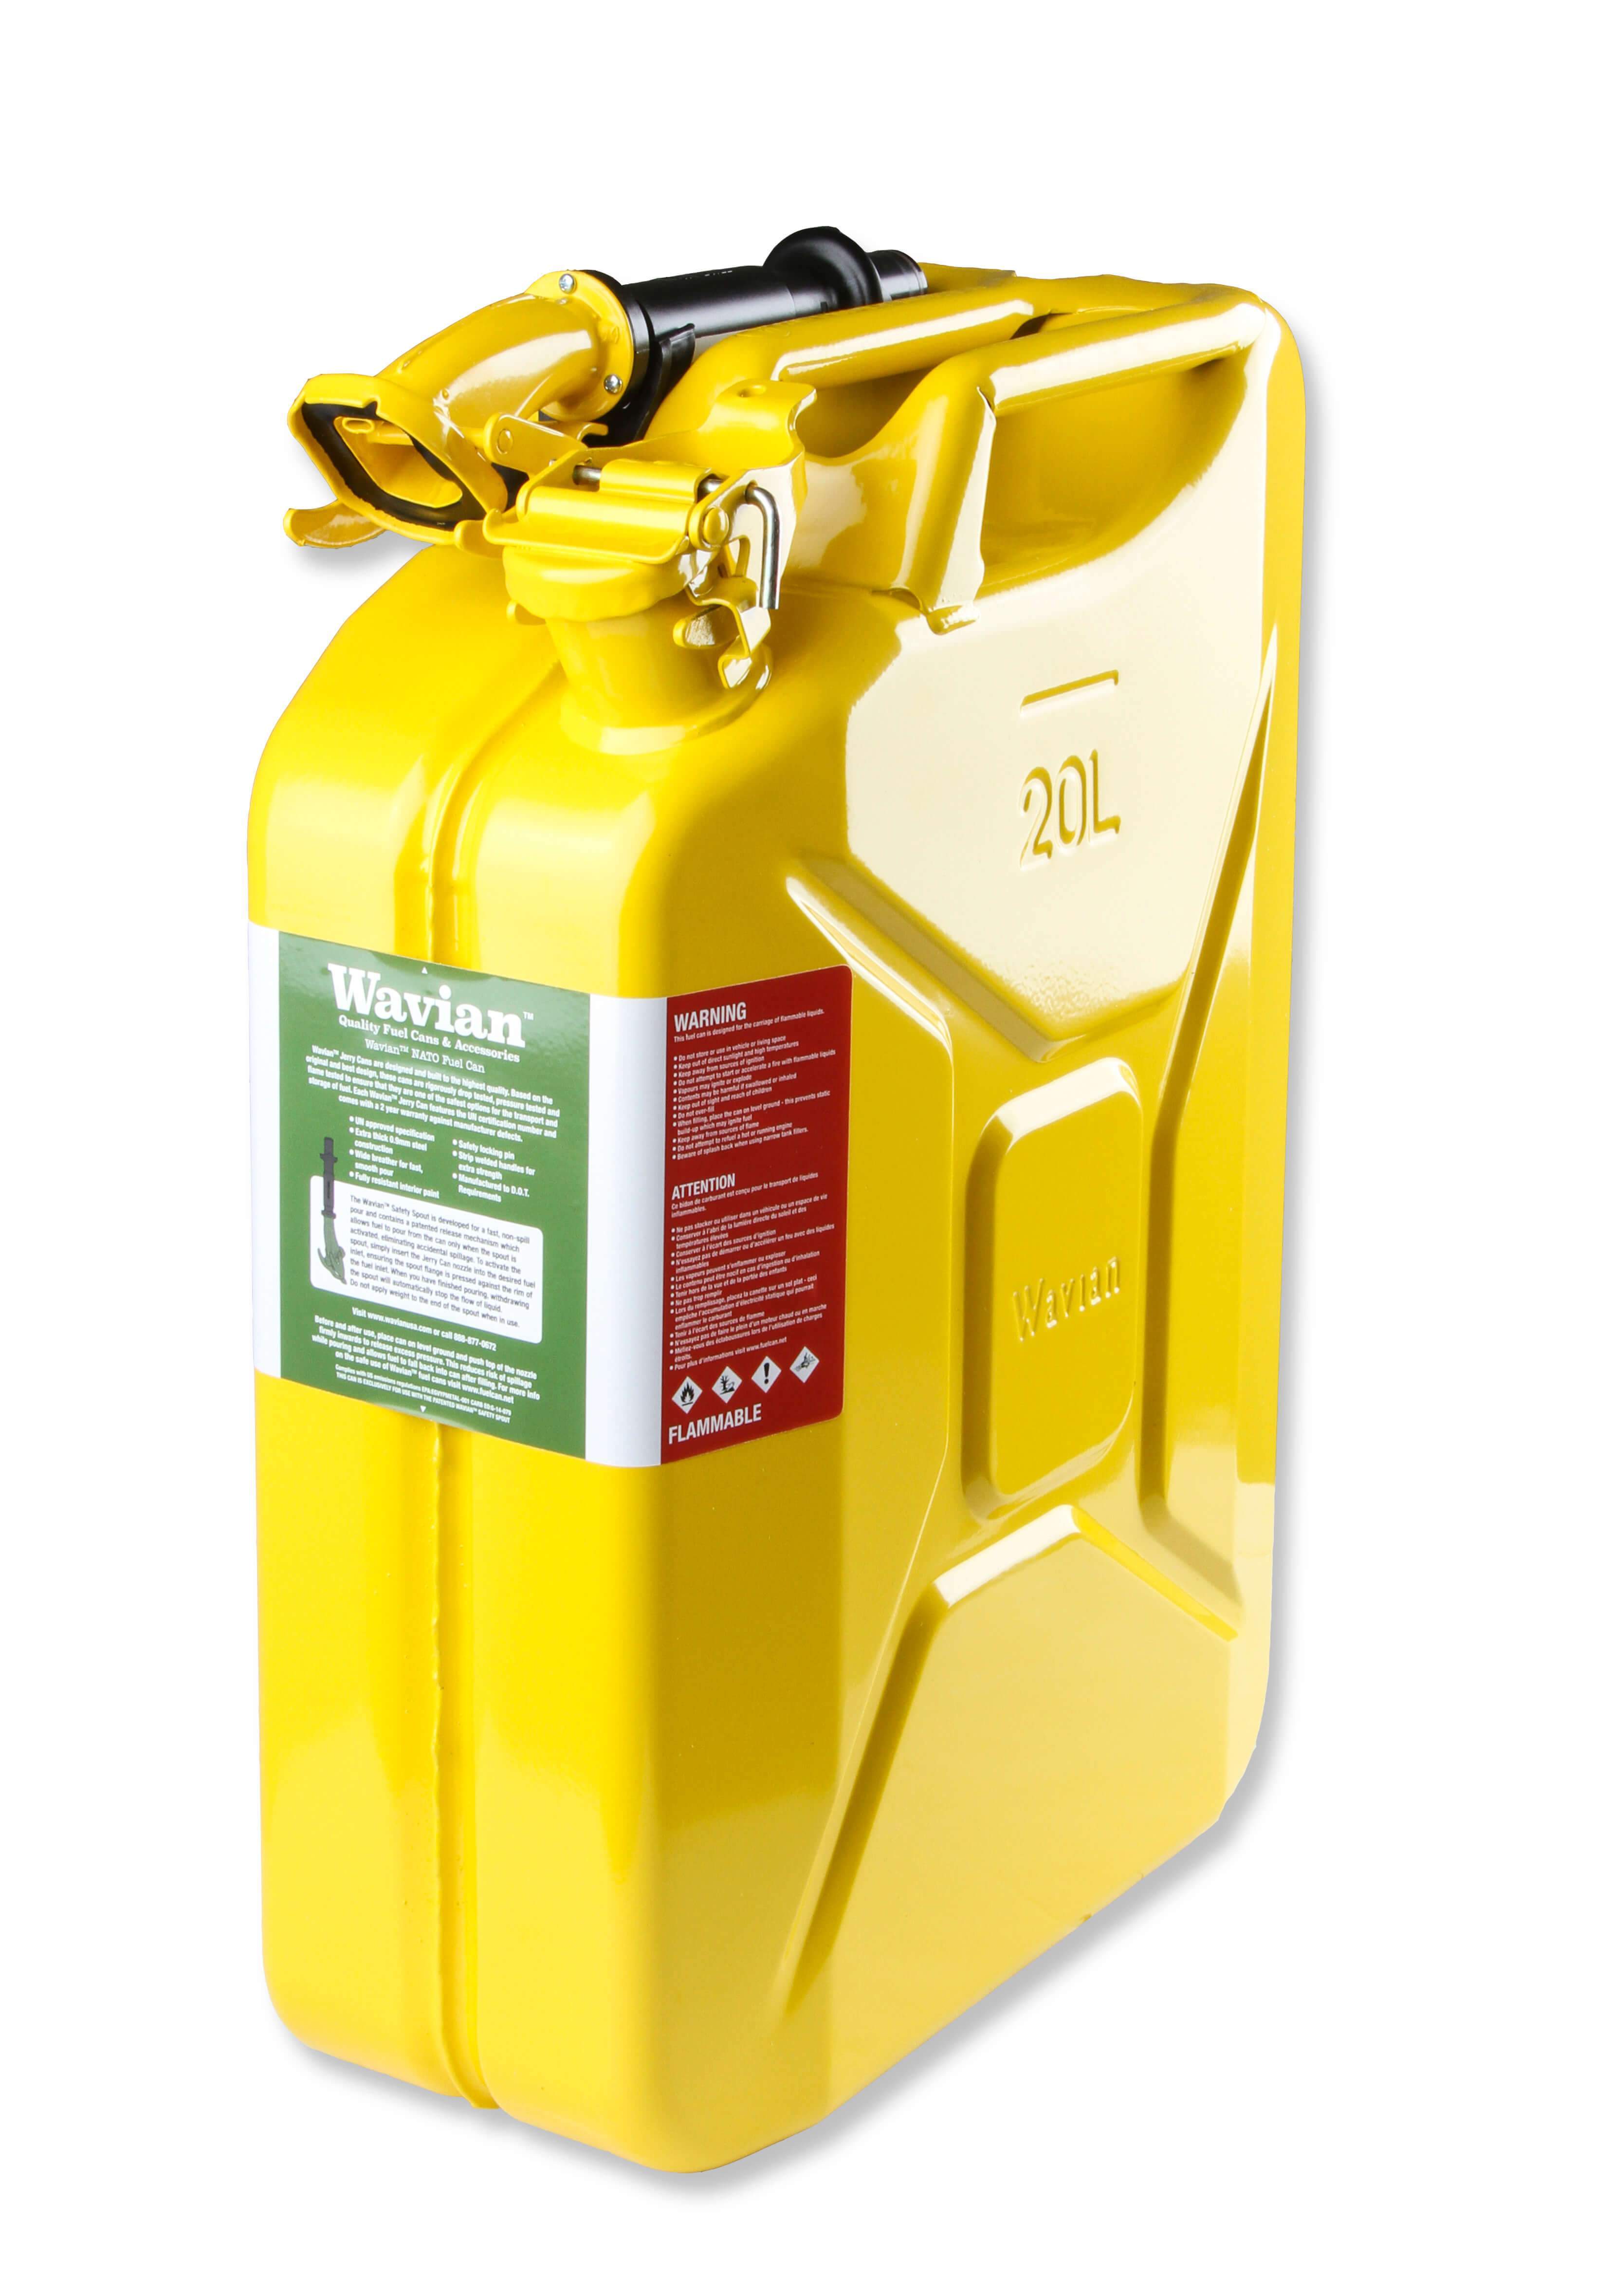 5.3 Gallon (20 Liter) Jerry Can